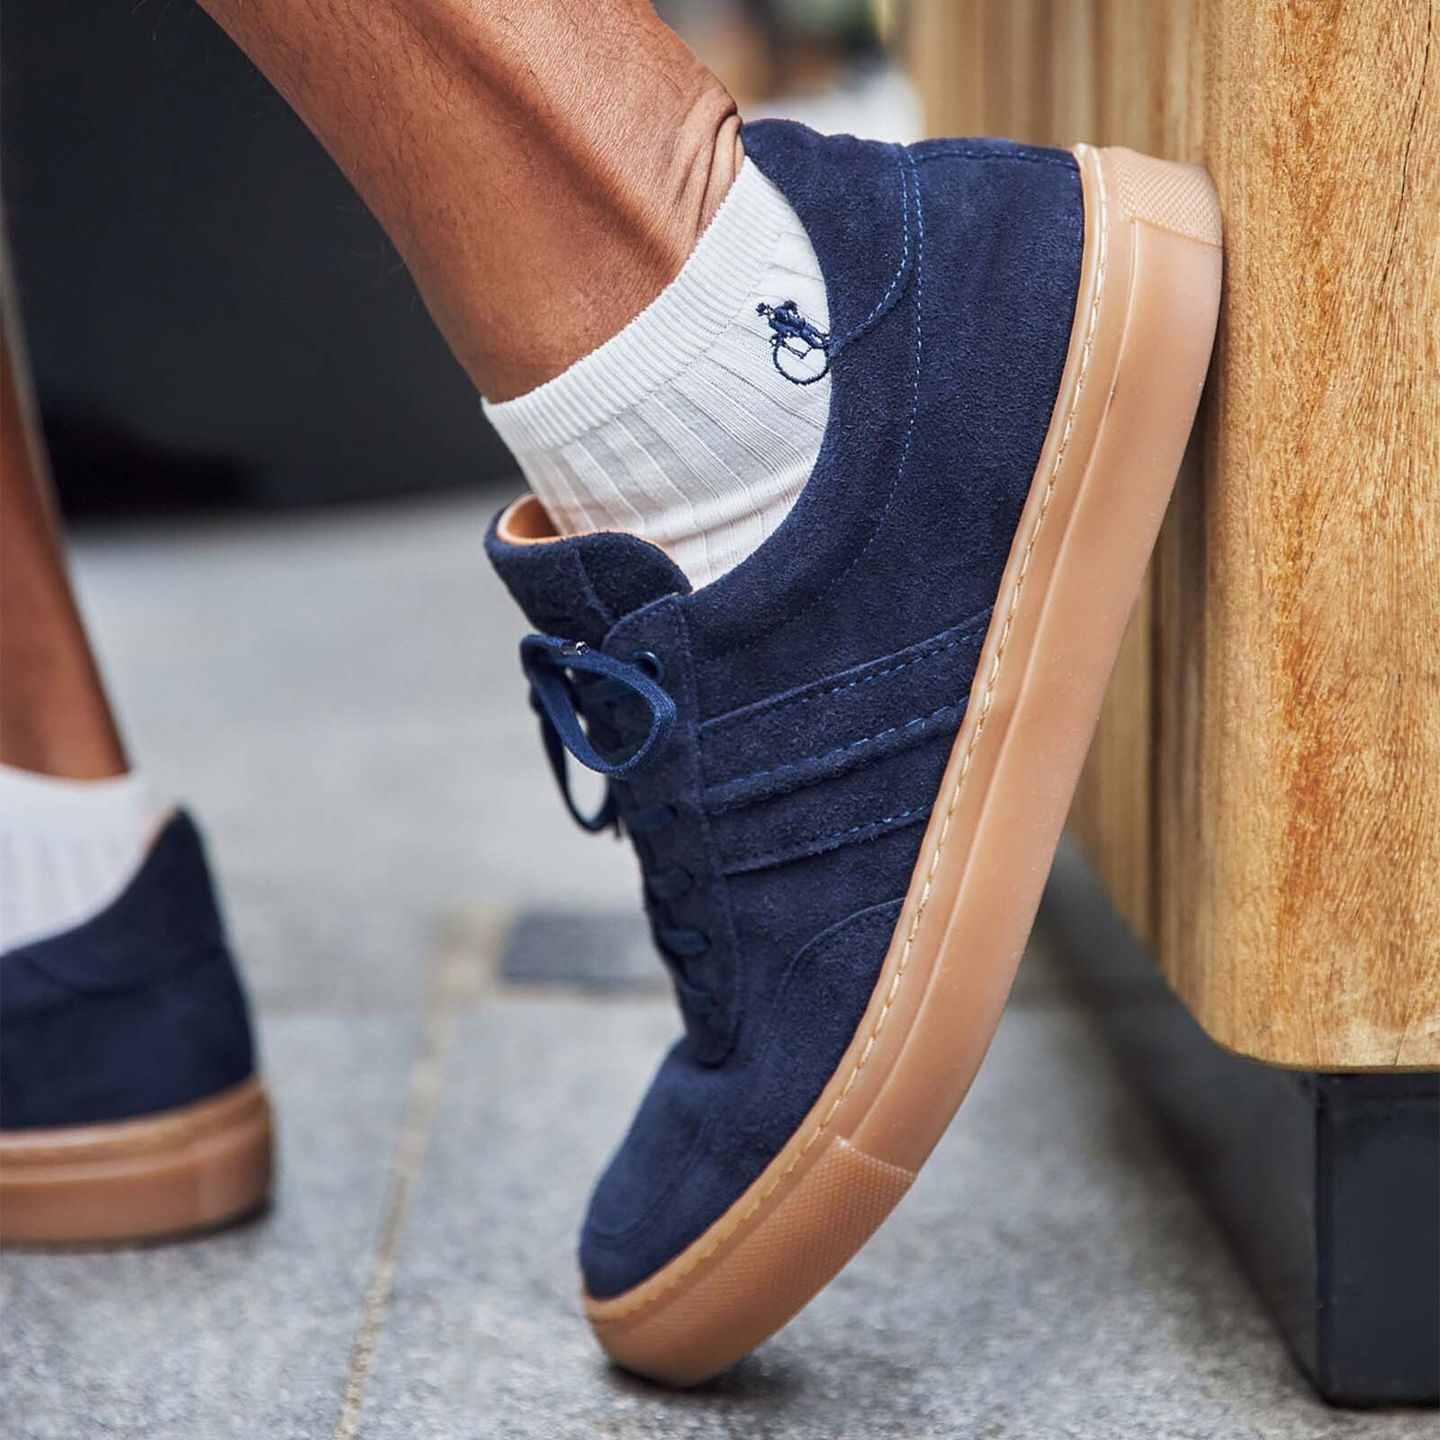 A close up shot of a pair of feet in white trainer socks and navy blue suede trainers